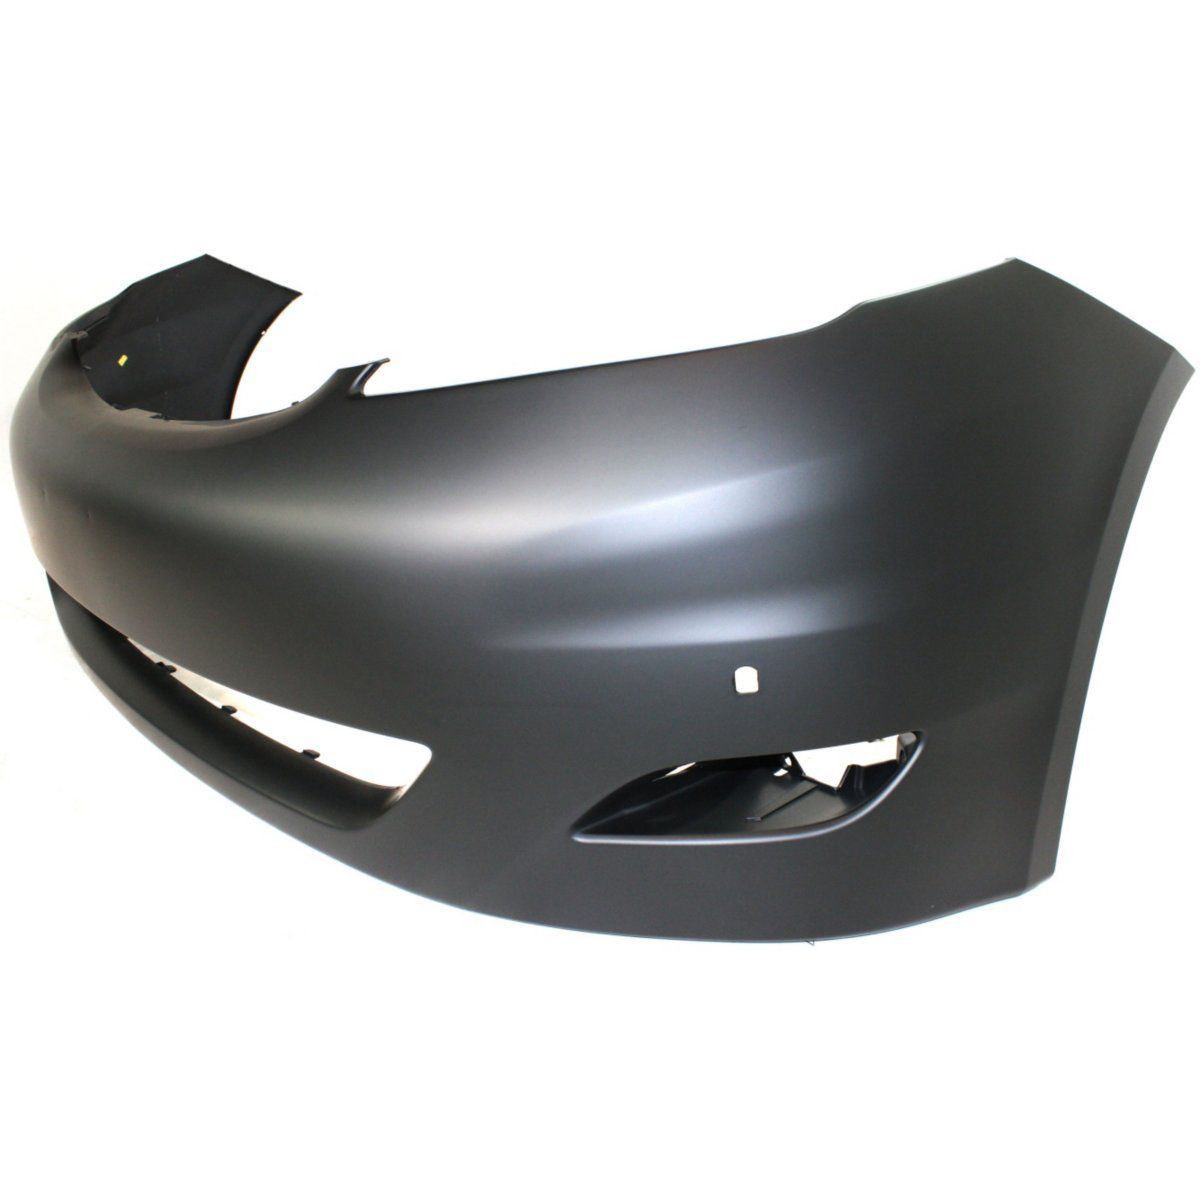 2006-2010 TOYOTA SIENNA Front Bumper Cover w/Park Assist Sensors Painted to Match